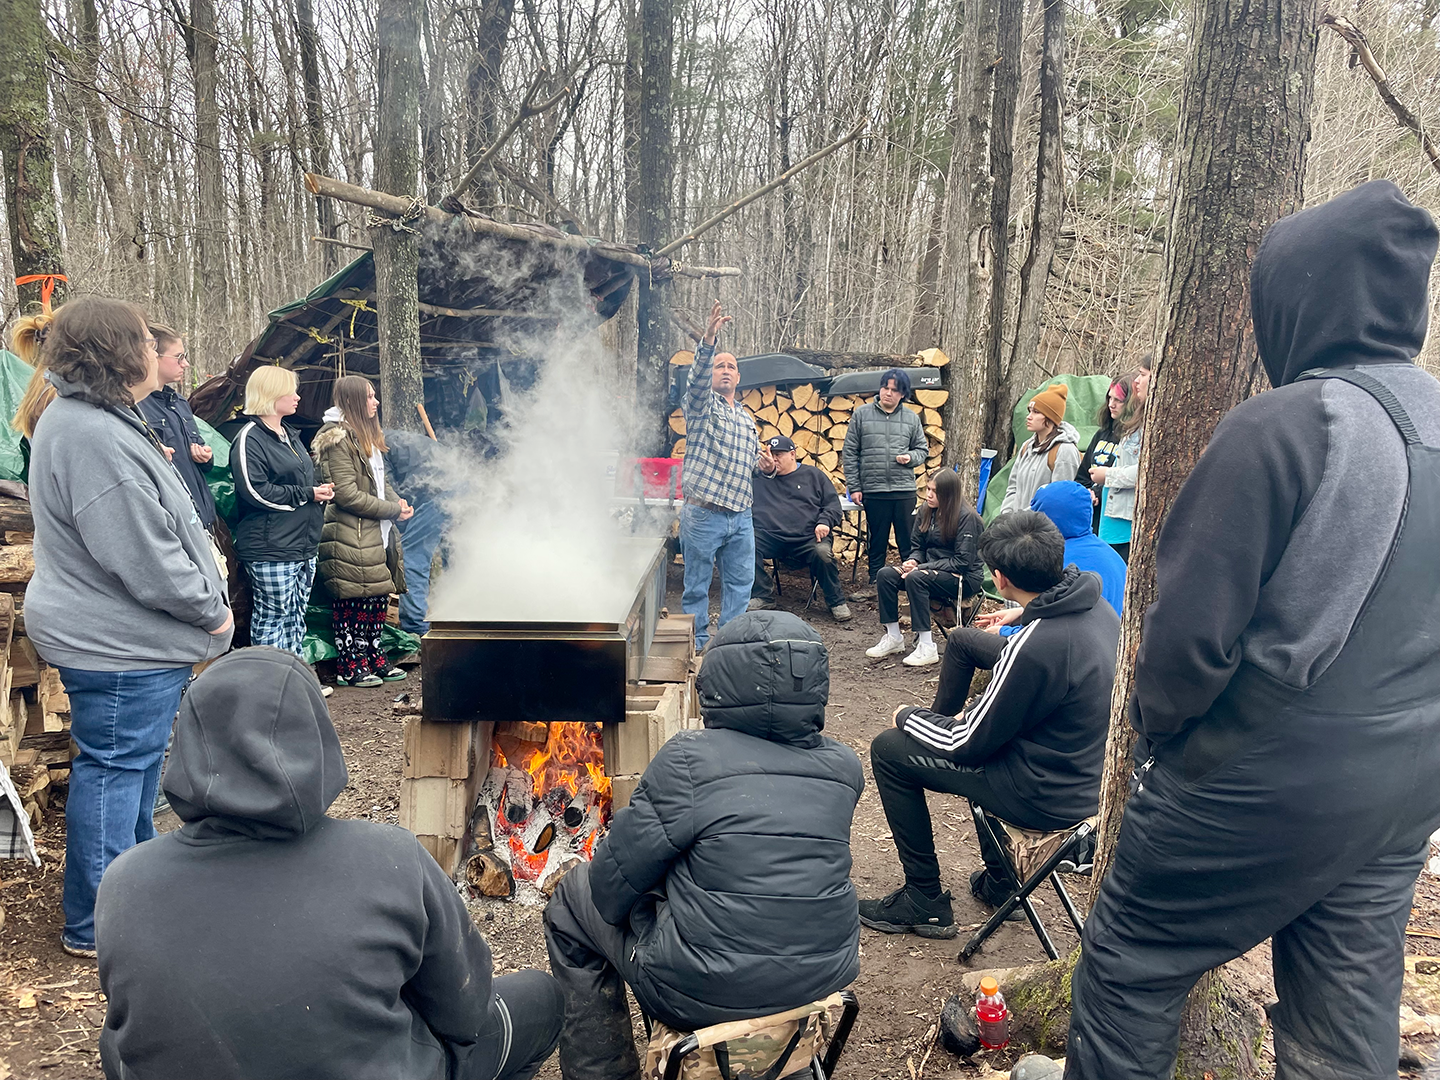 Culture instructor teaching students about sugar camp